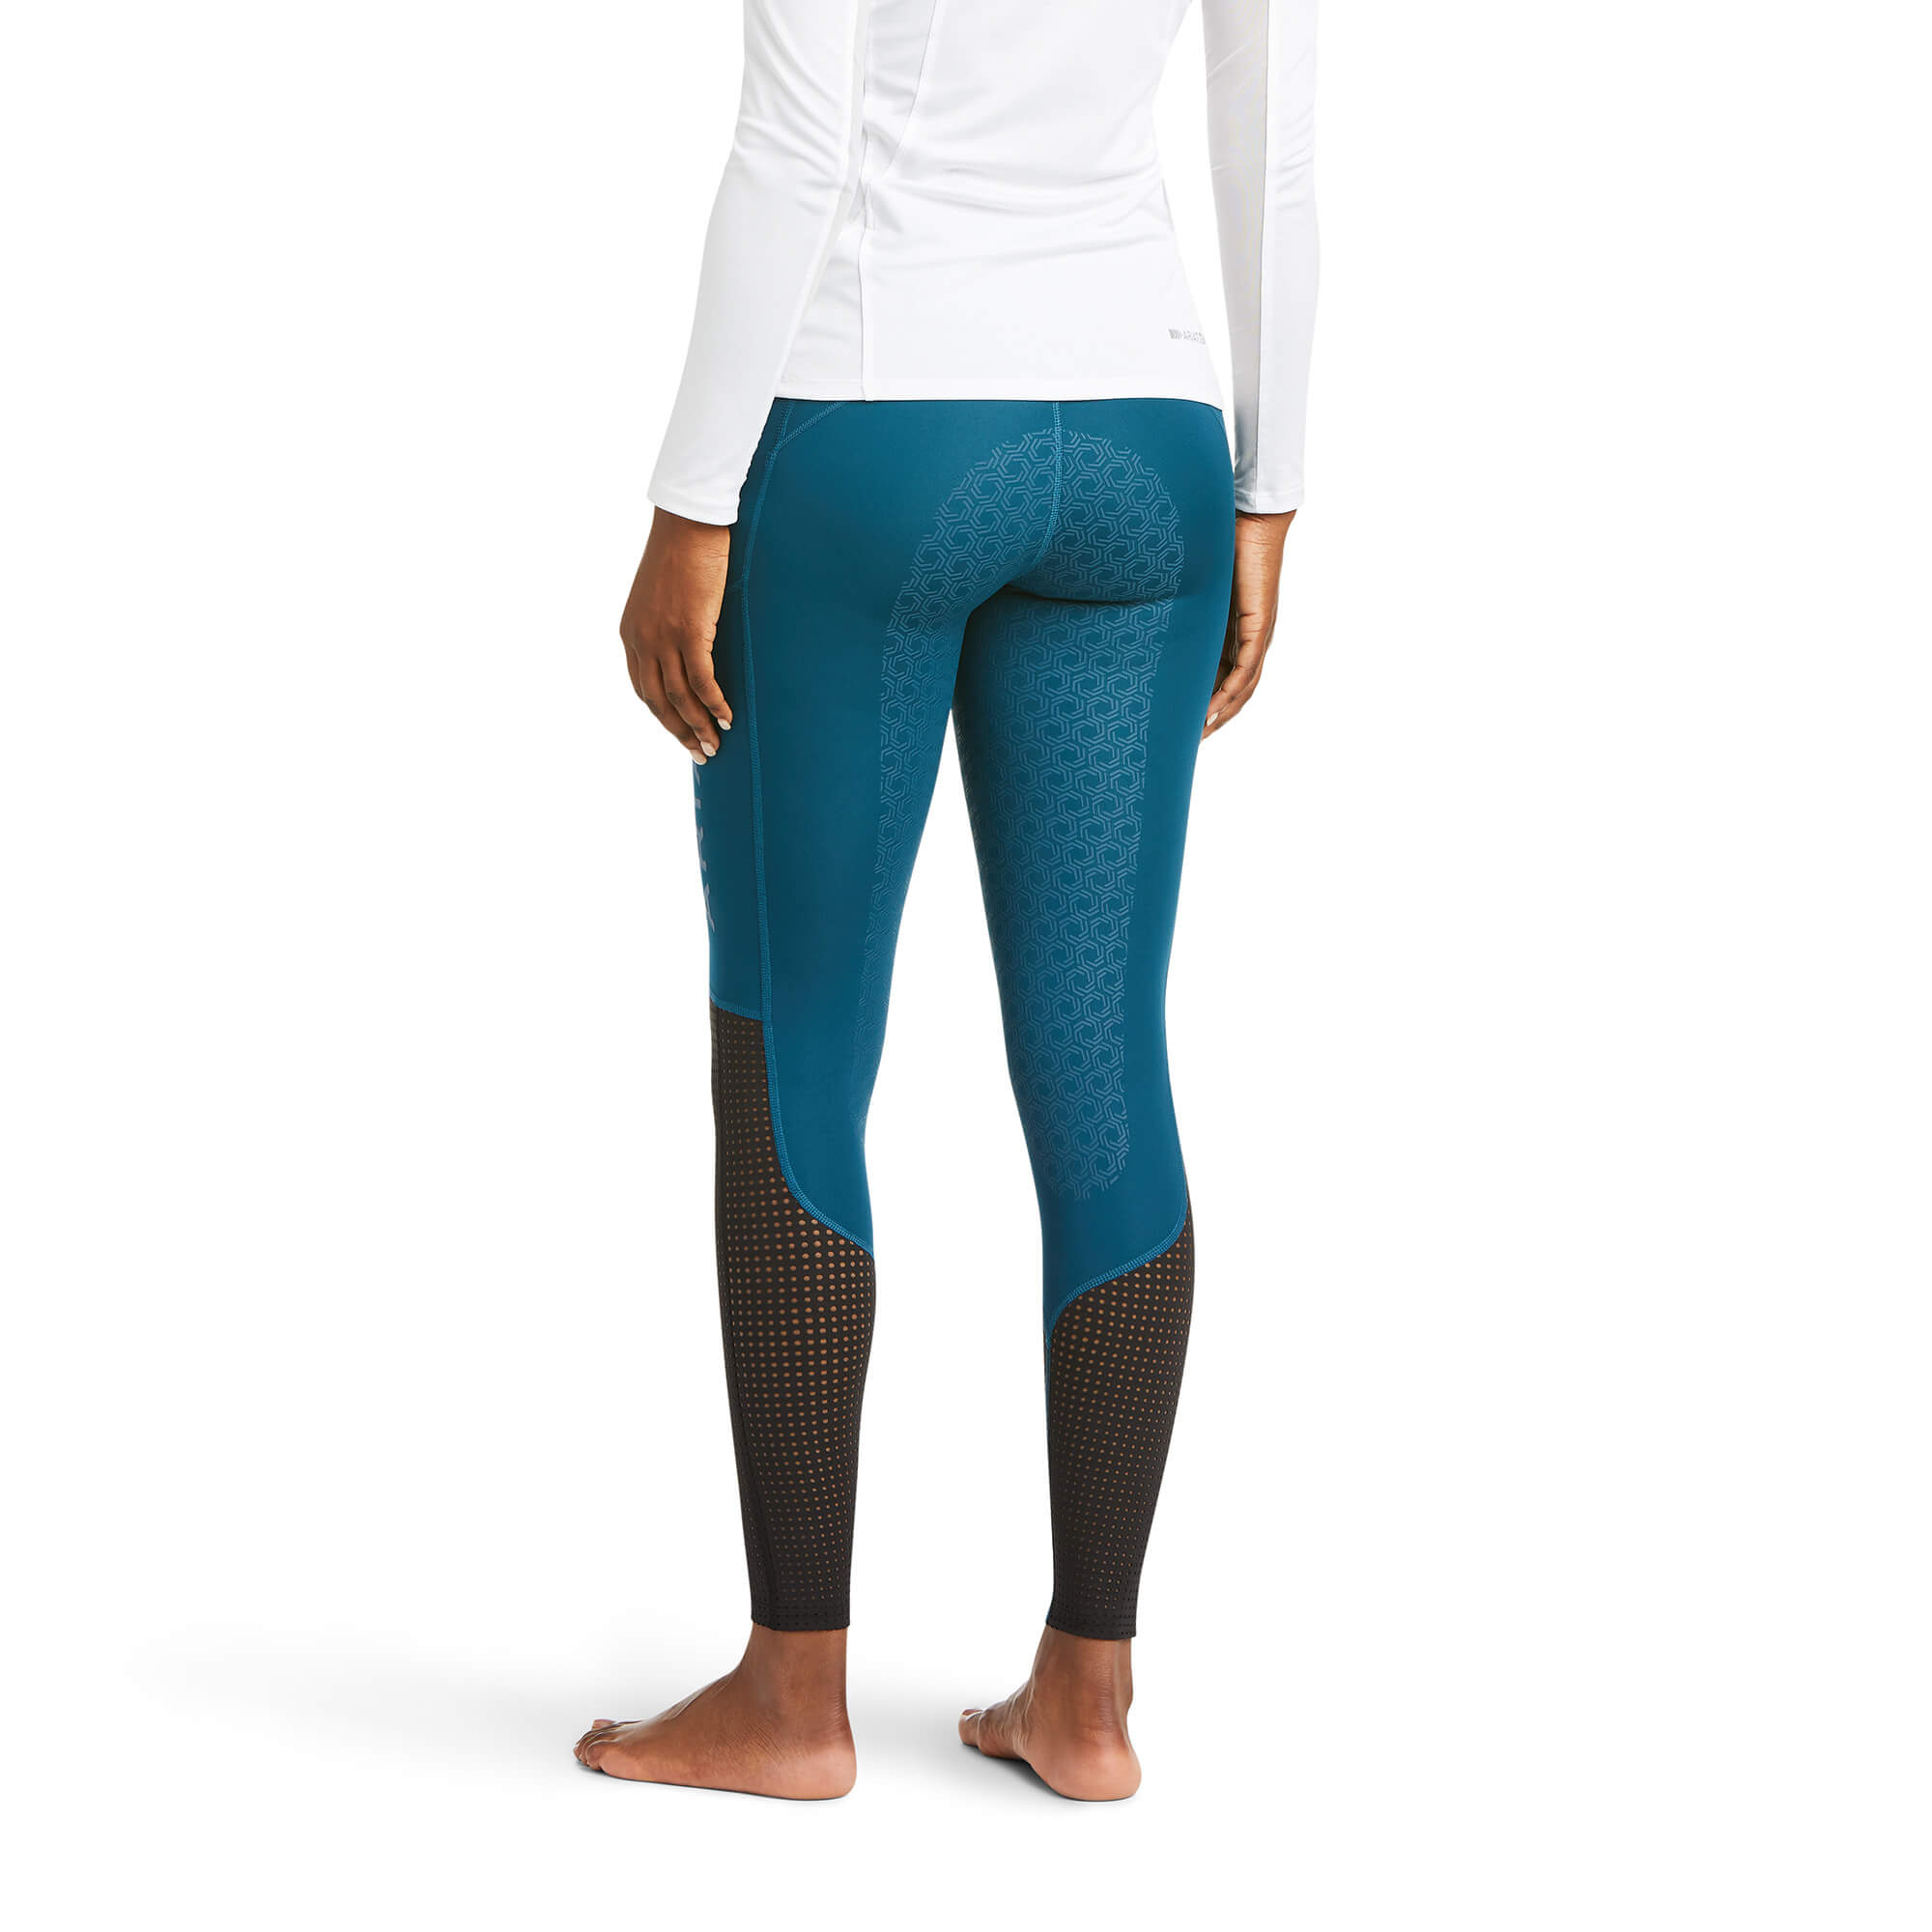 Ariat Women's EOS Full Seat Tights - Teal